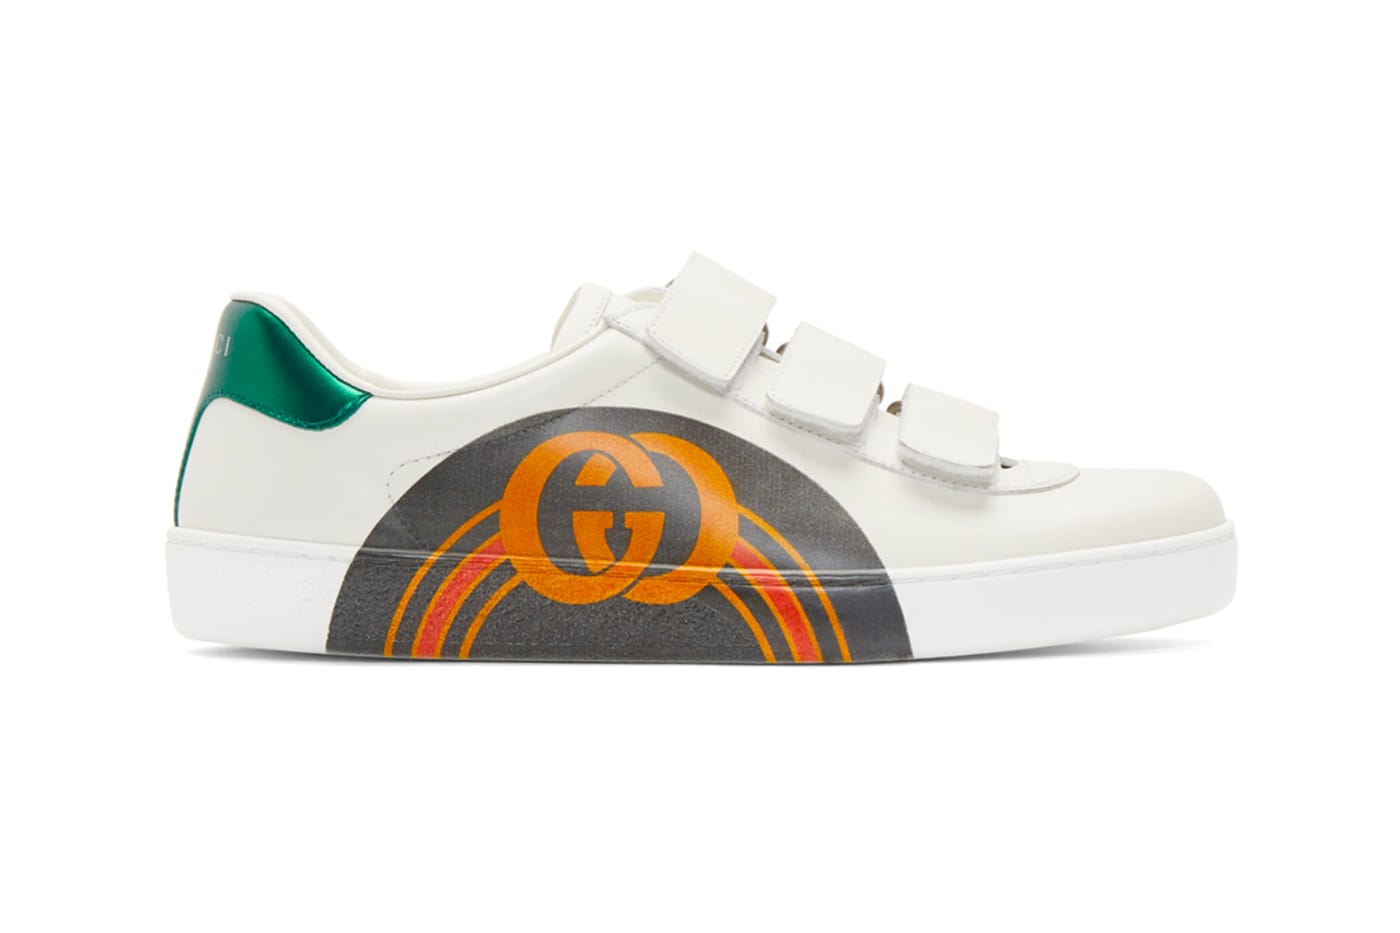 new gucci sneakers 2019